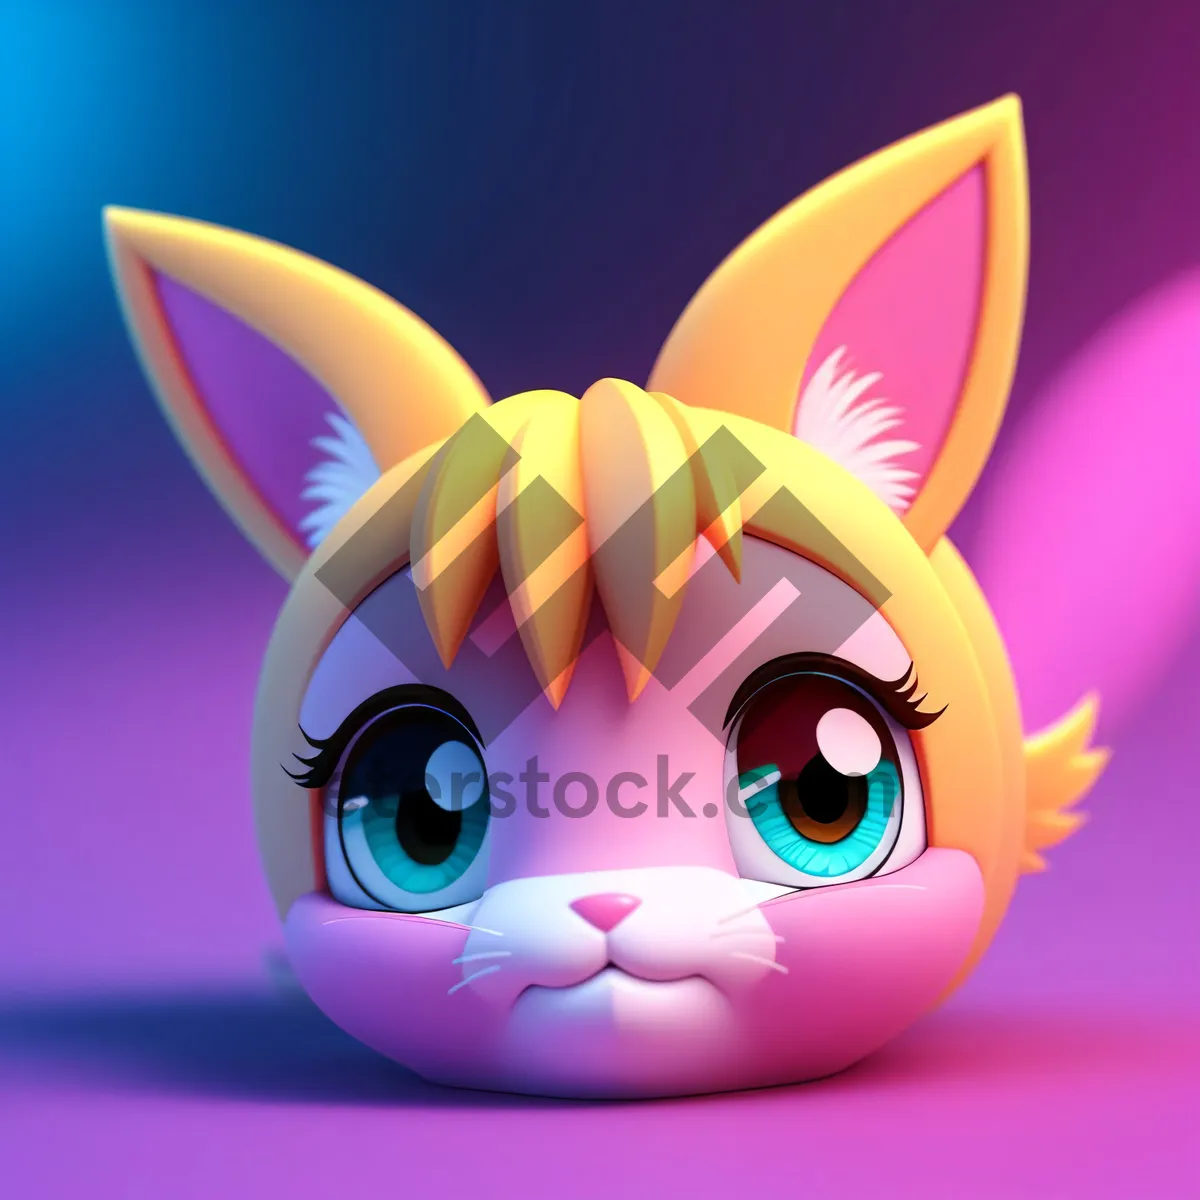 Picture of Cute Bunny Cartoon Icon - Happy and Fun Animal Character